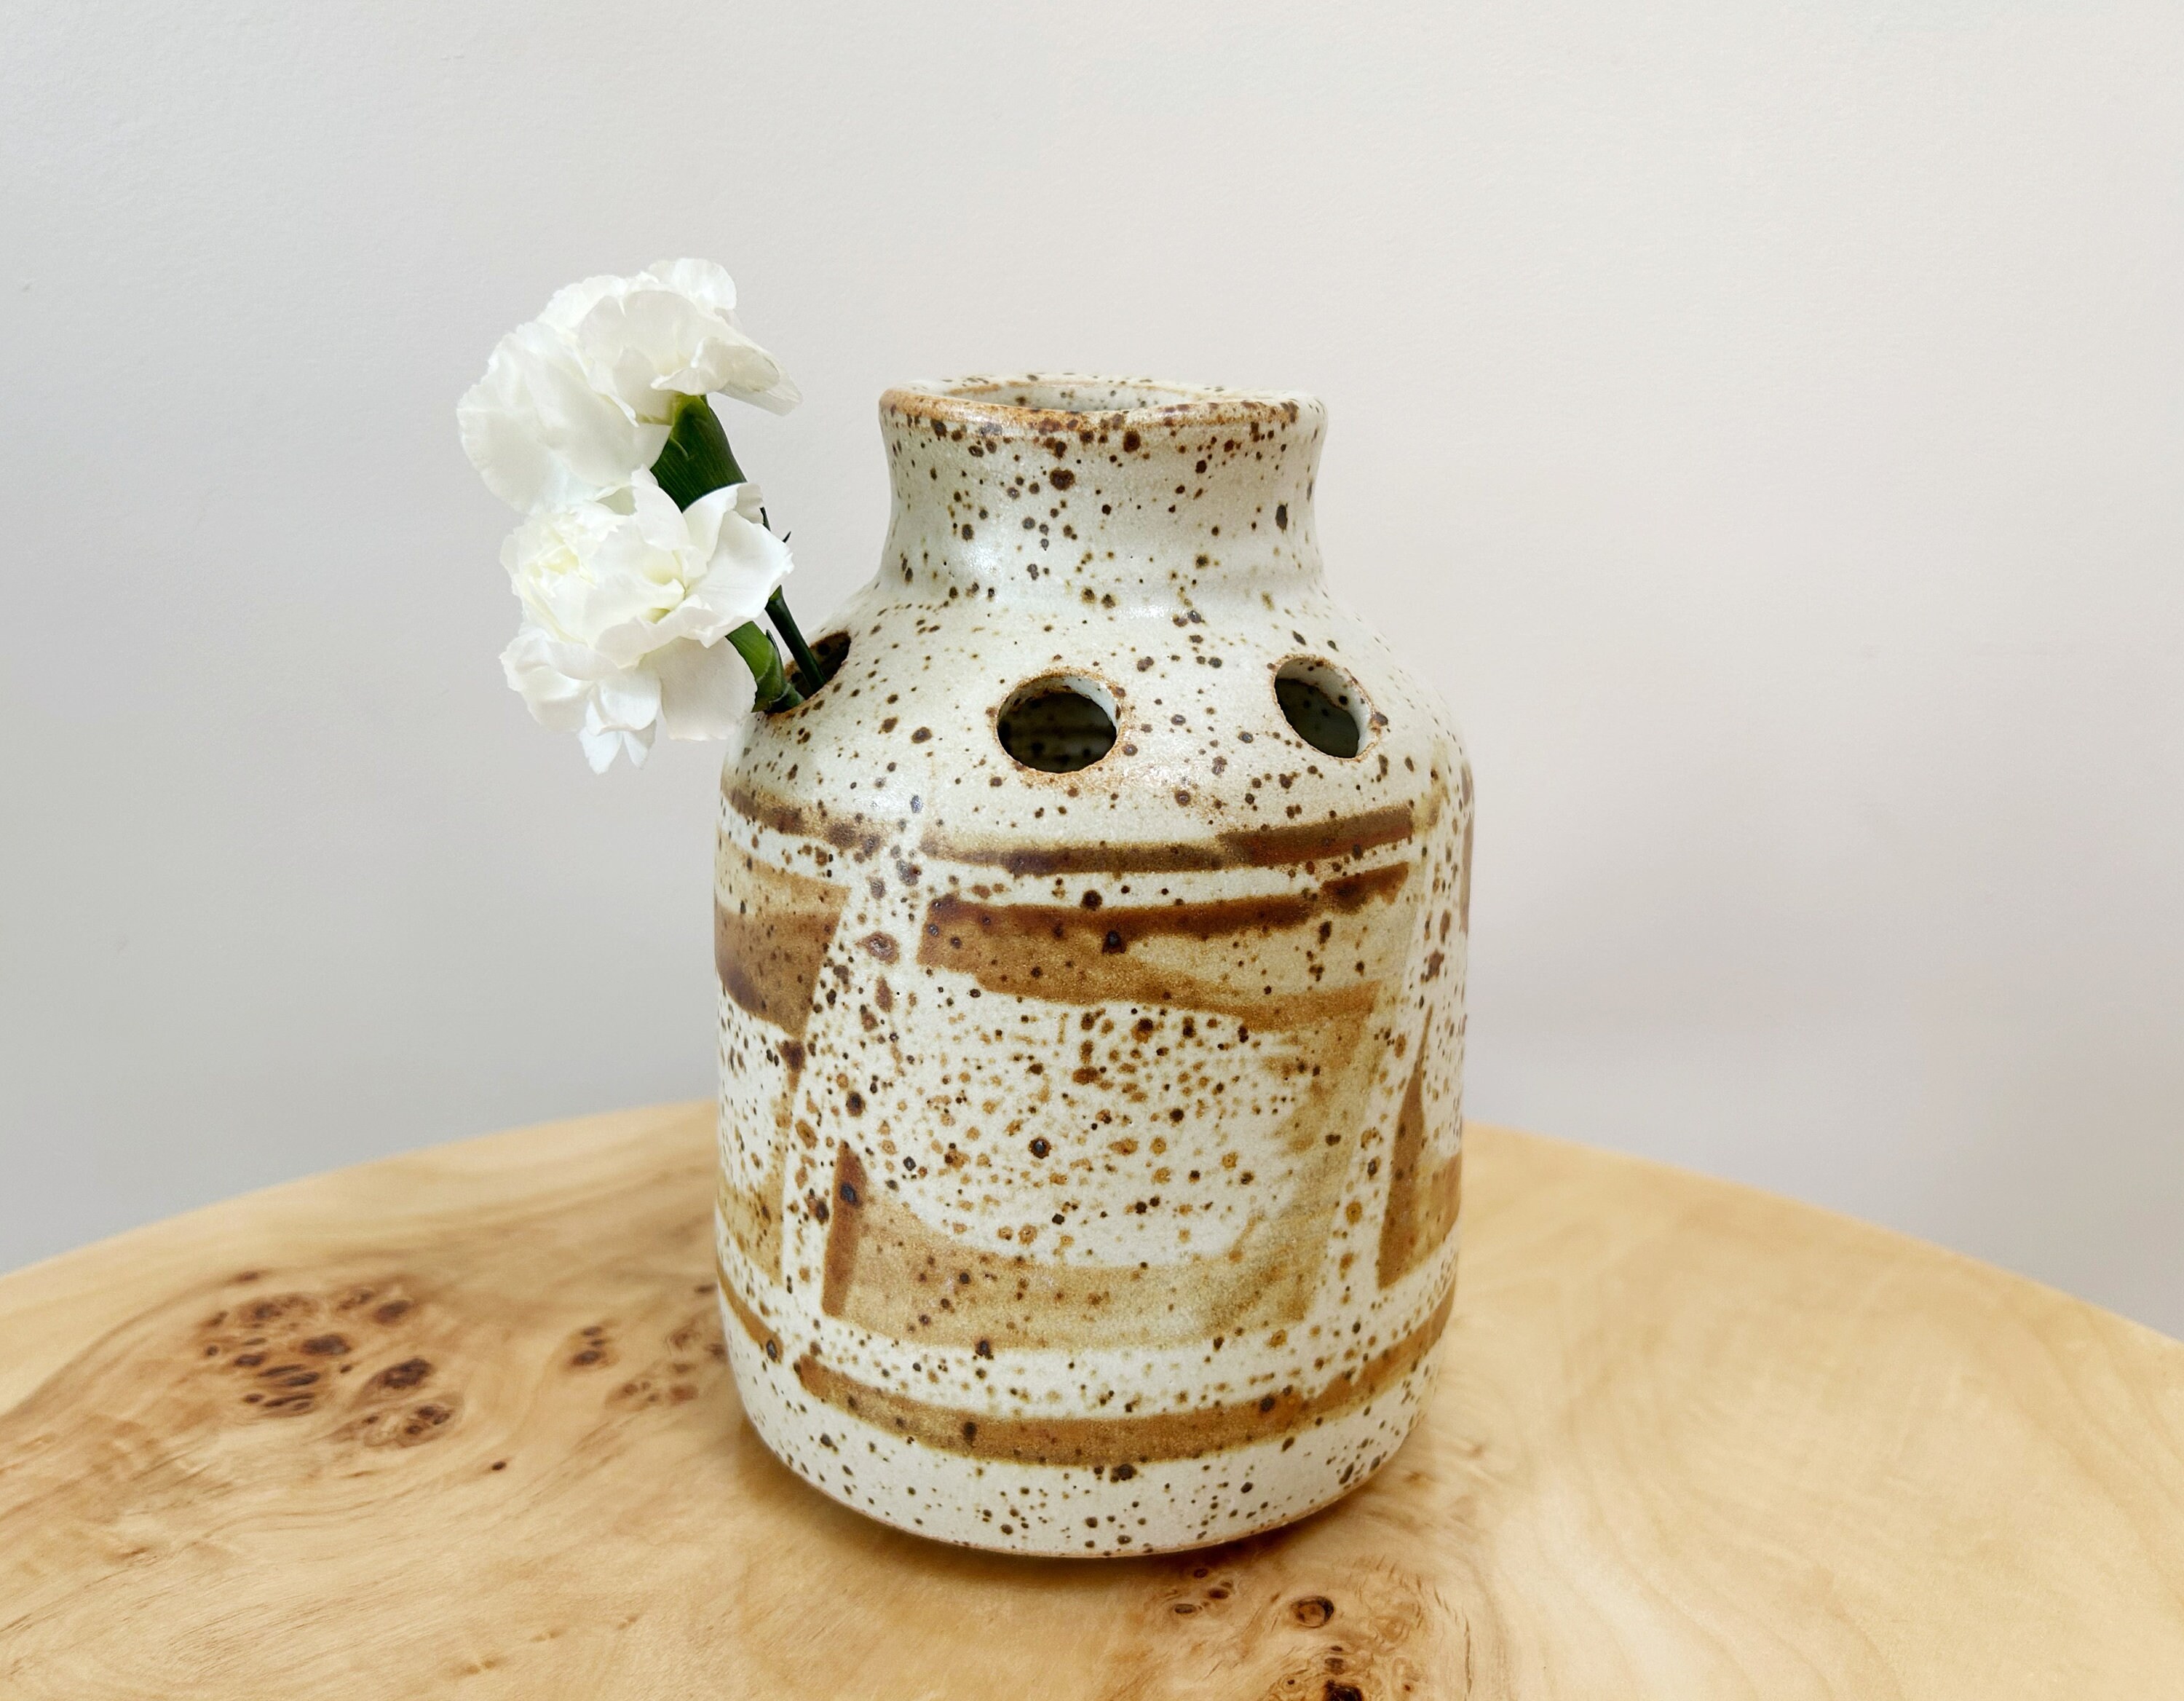 A handthrown and unique ceramic flower frog to dress up your table